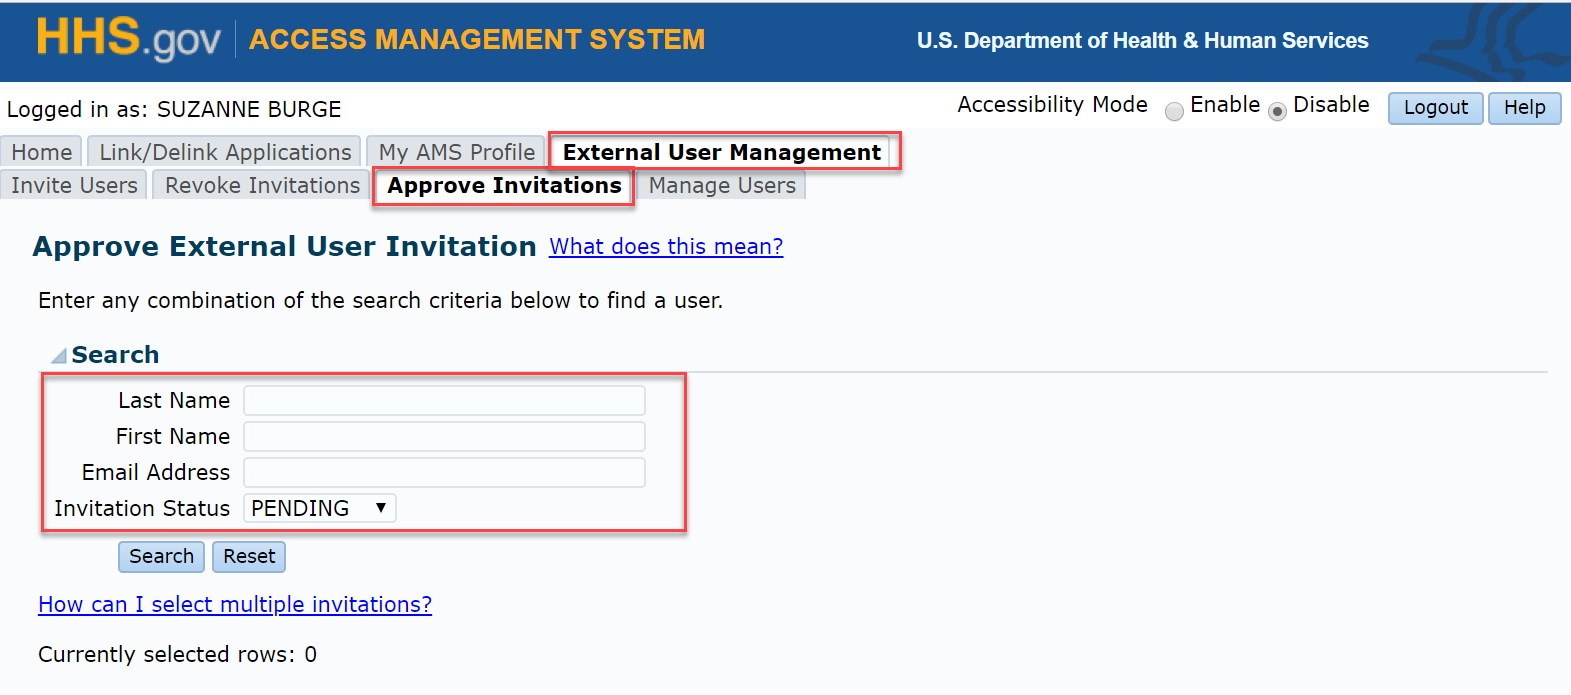 Approve External User Invitation screen with "External User Management" tab,
"Approve Invitations" tab, and Search form fields highlighted